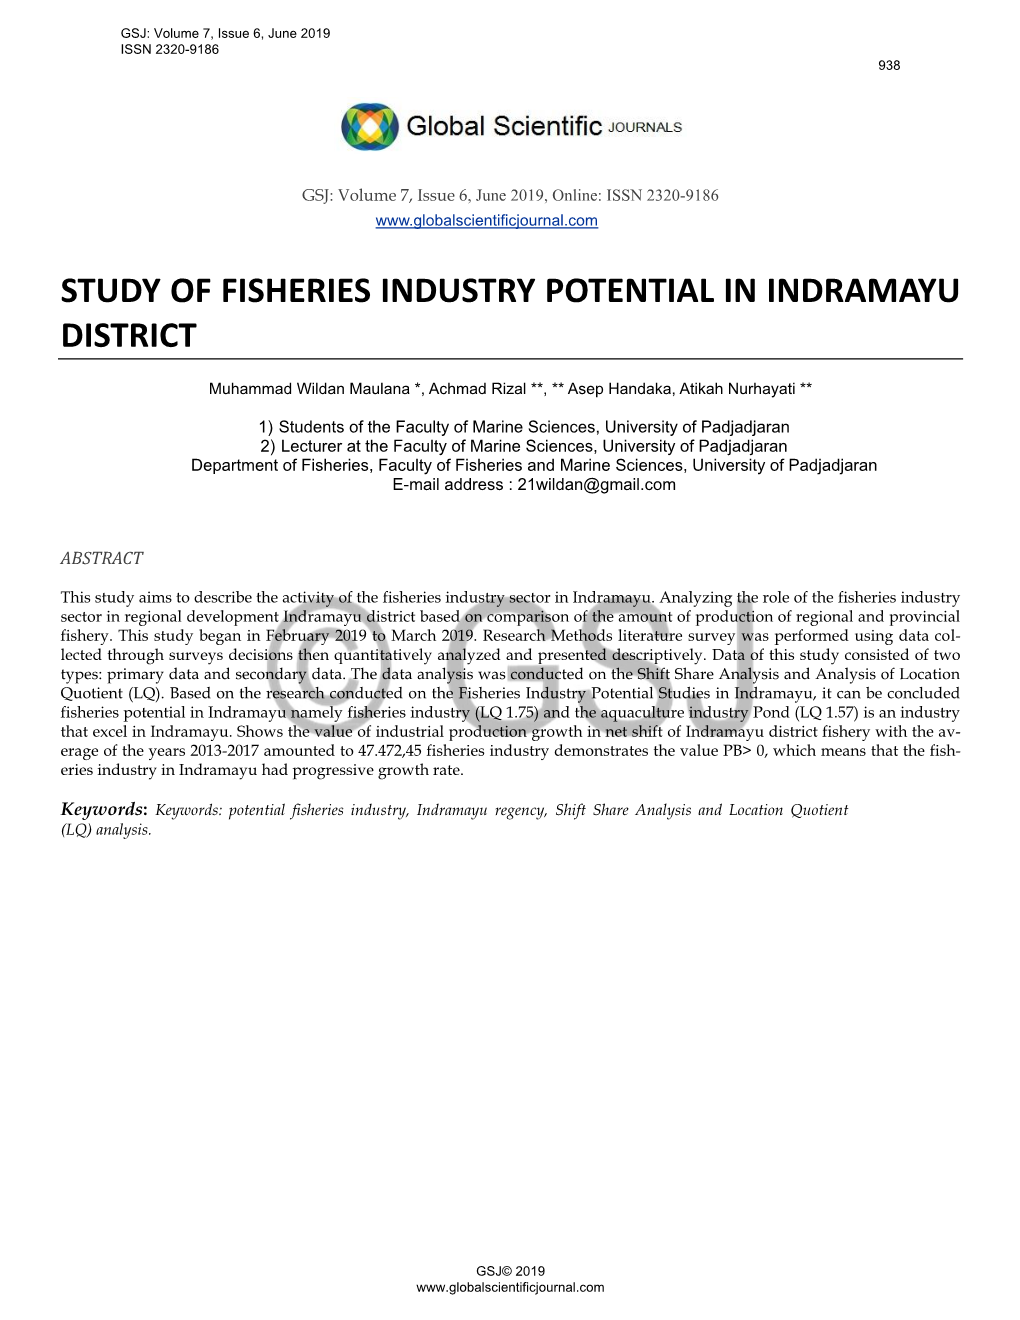 Study of Fisheries Industry Potential in Indramayu District